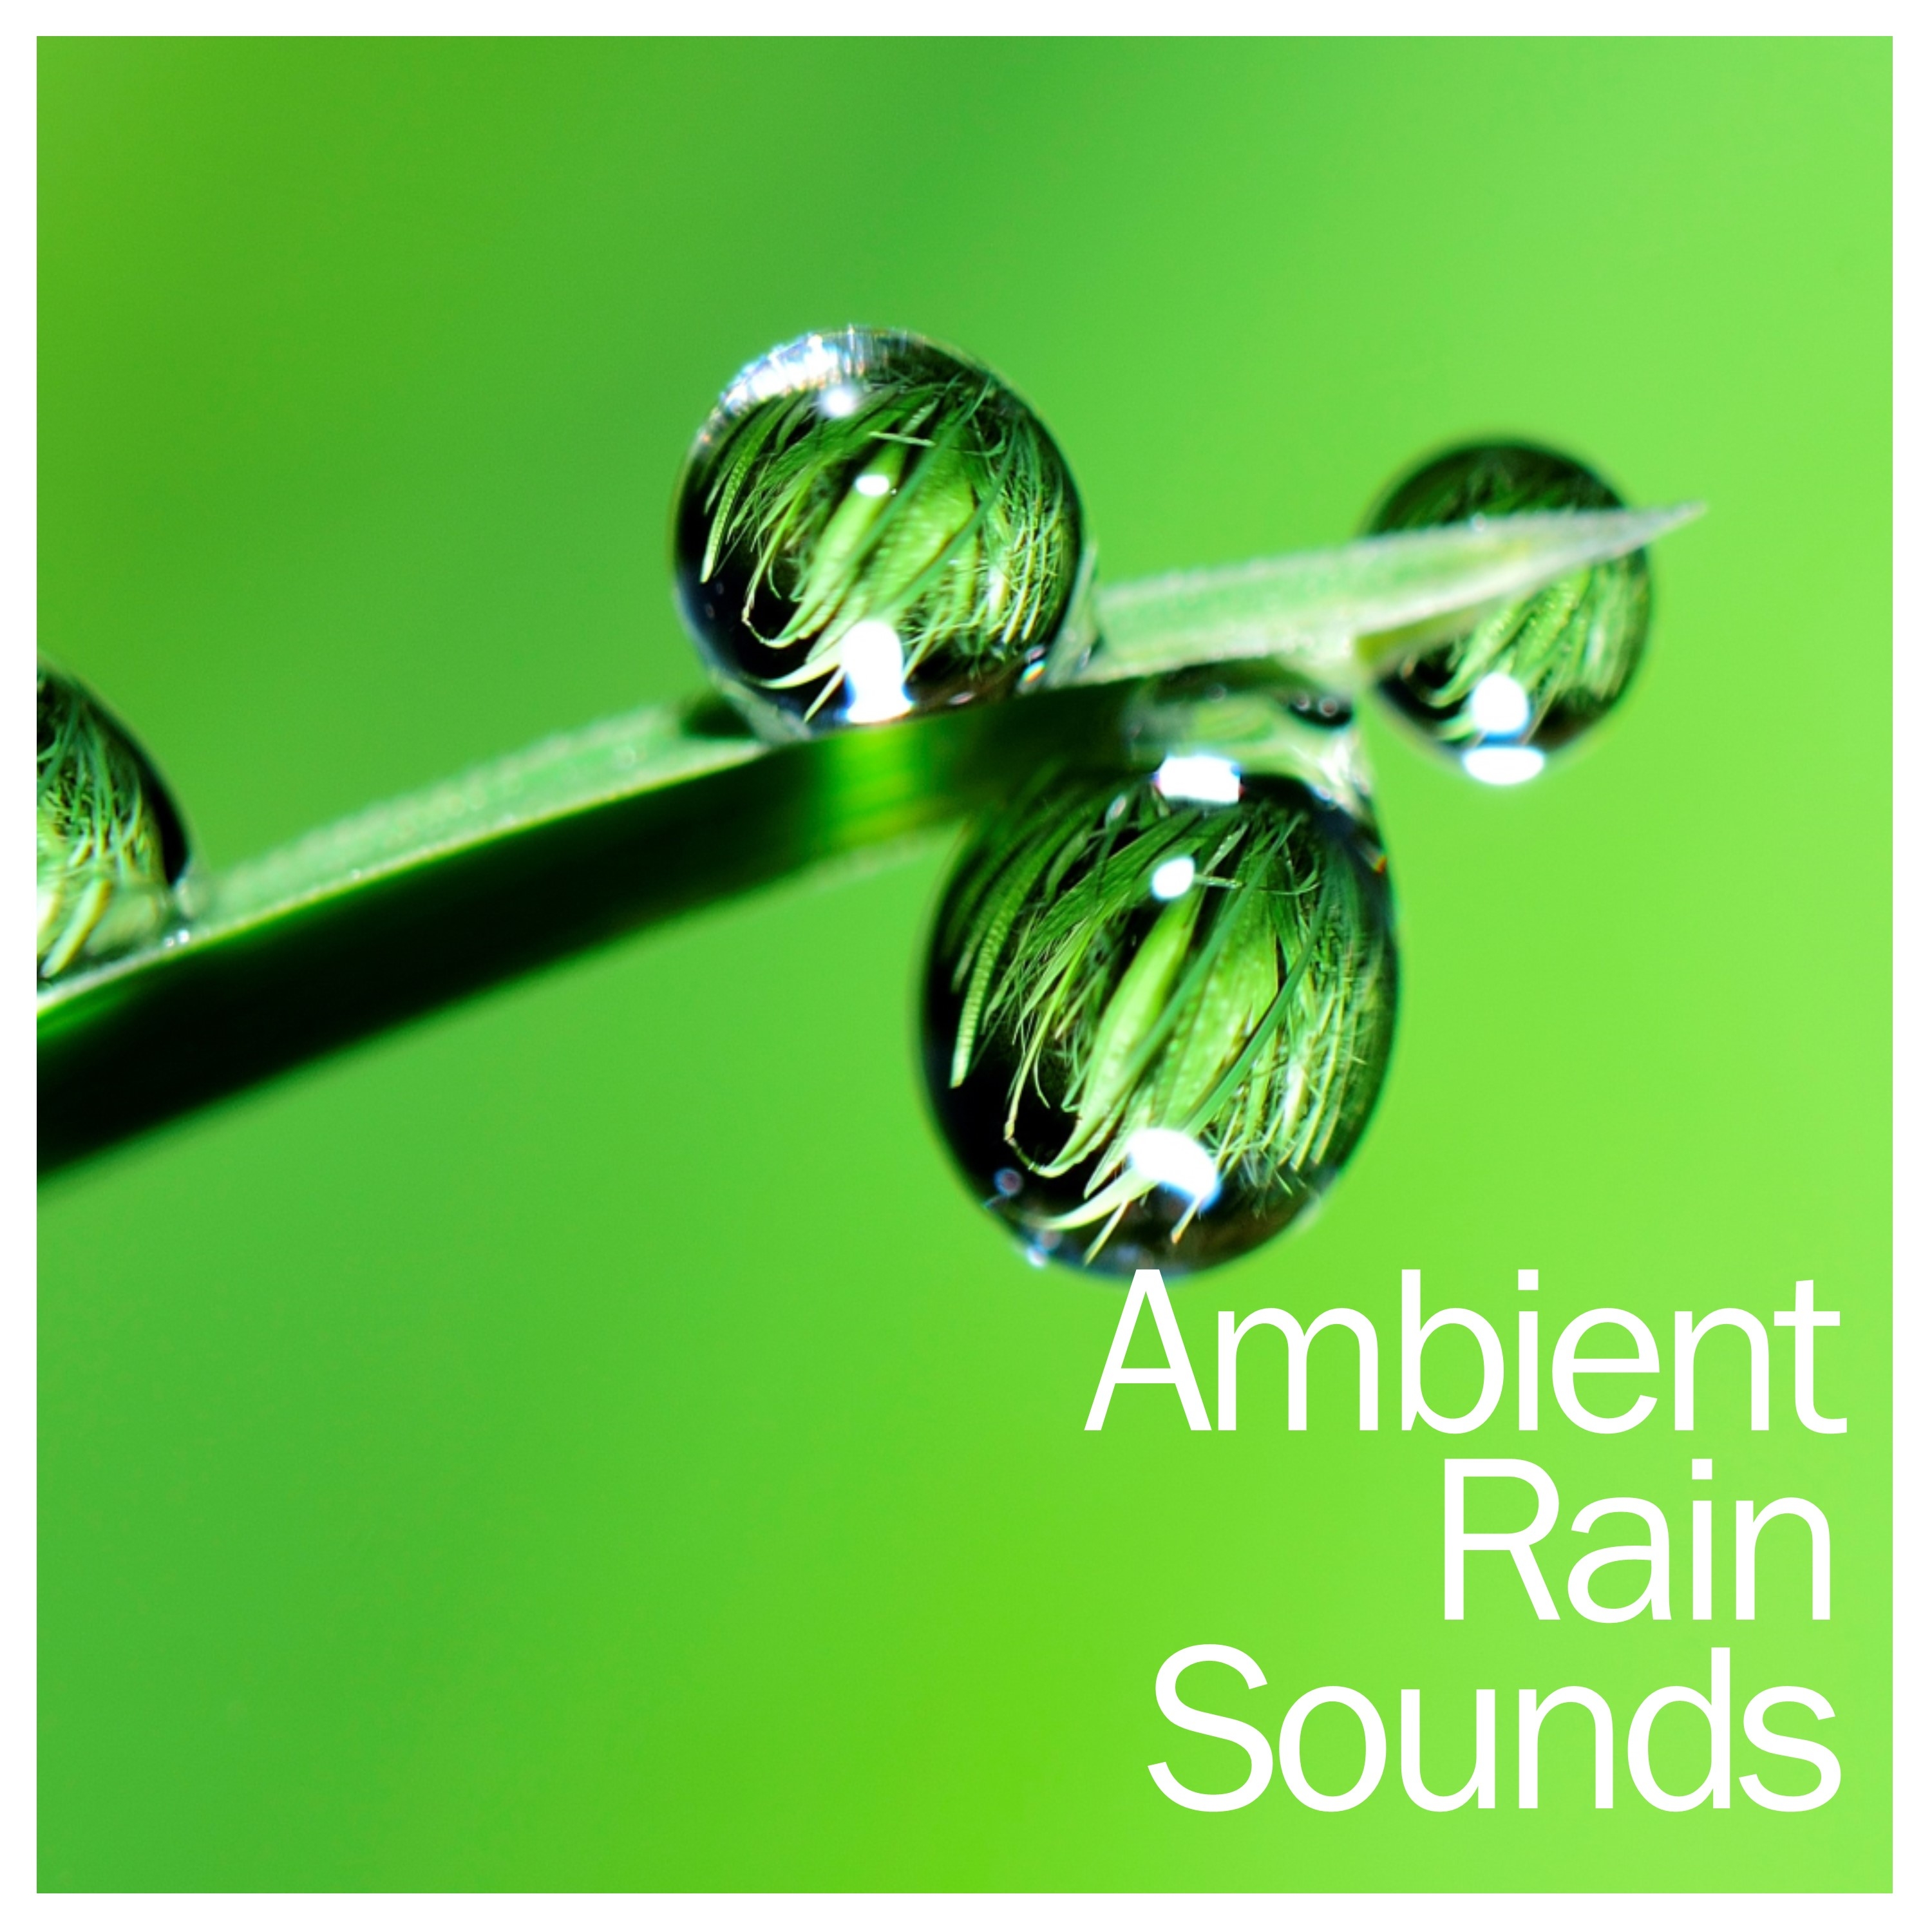 14 Ambient Rain Sounds - Calming Sounds of Mother Nature